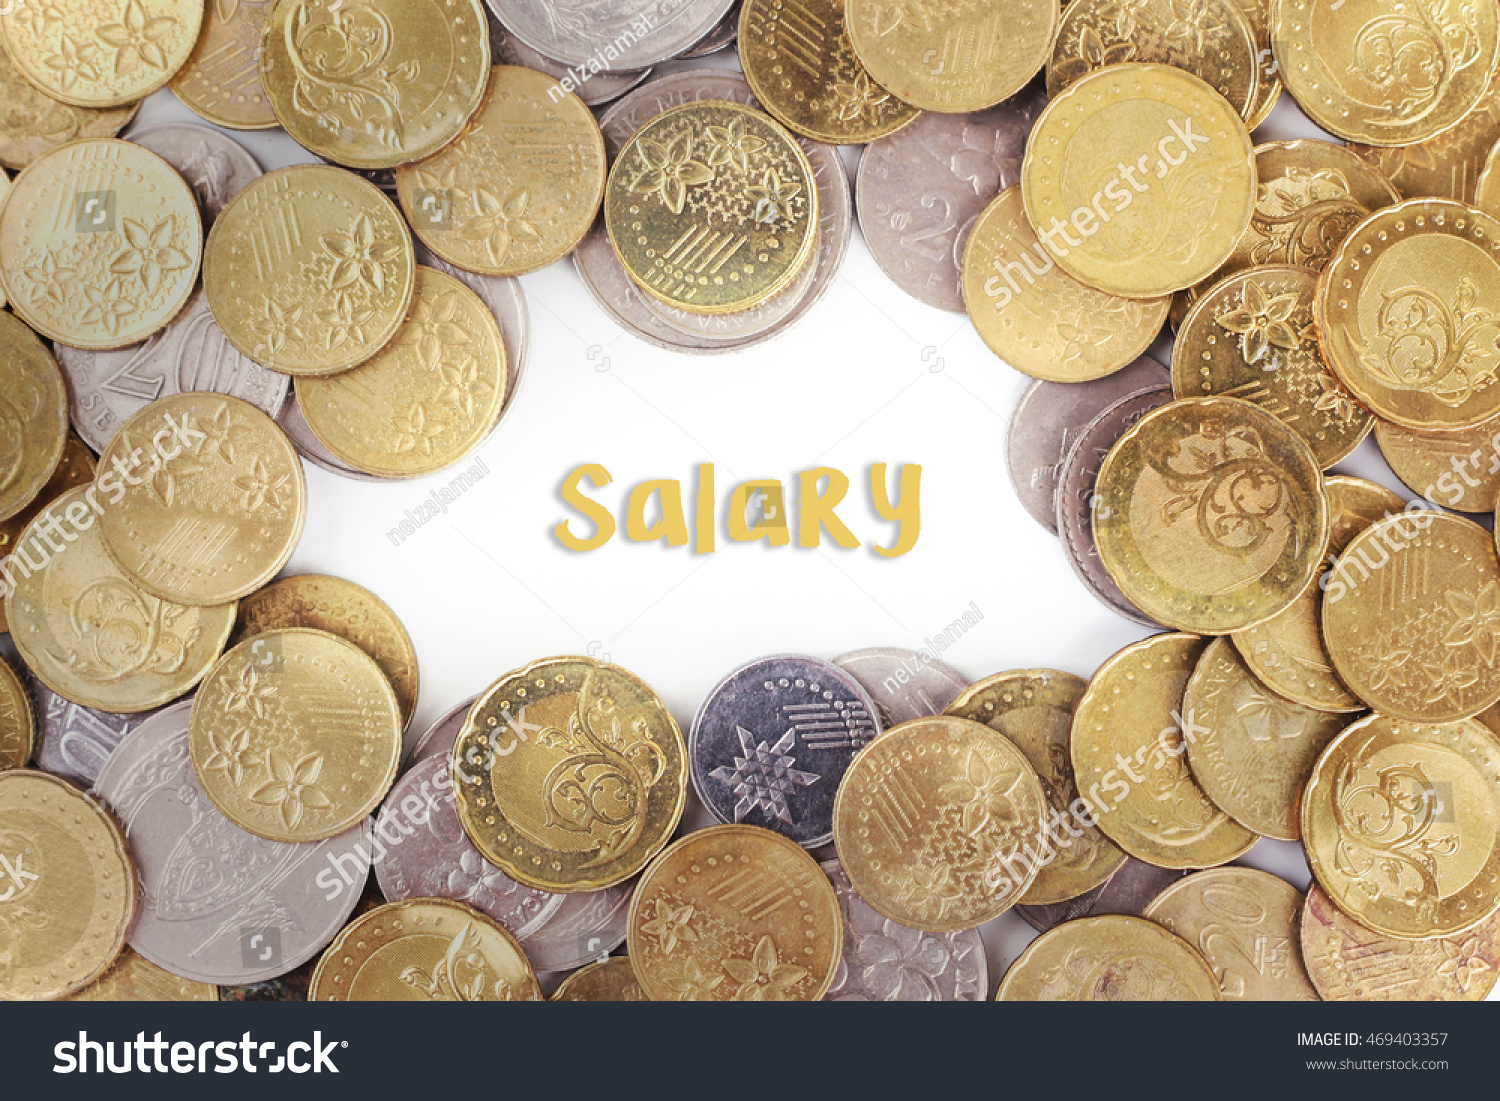 Background Gold Coin Word Salary Middle Stock Photo 469403357 - Shutterstock